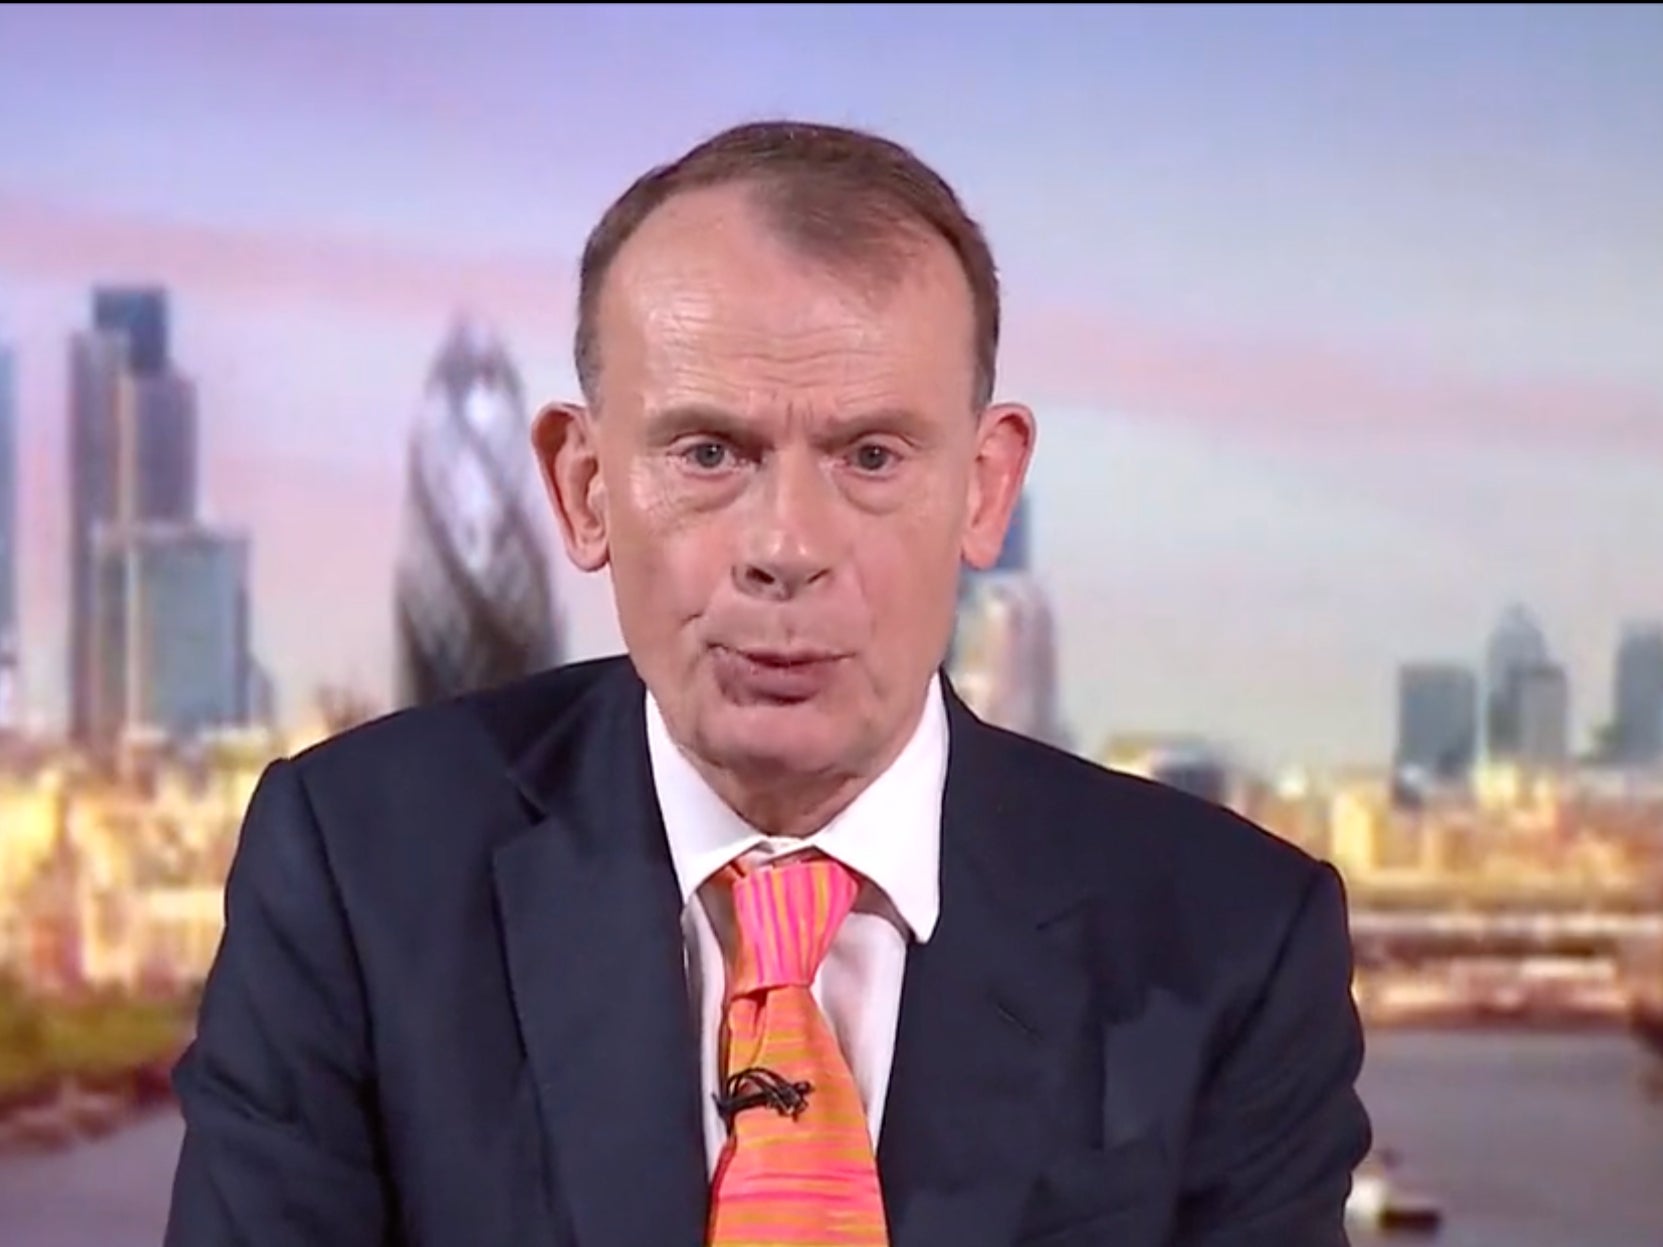 Andrew Marr brought his two-decade BBC career to an end with an ‘Anchorman’ quote